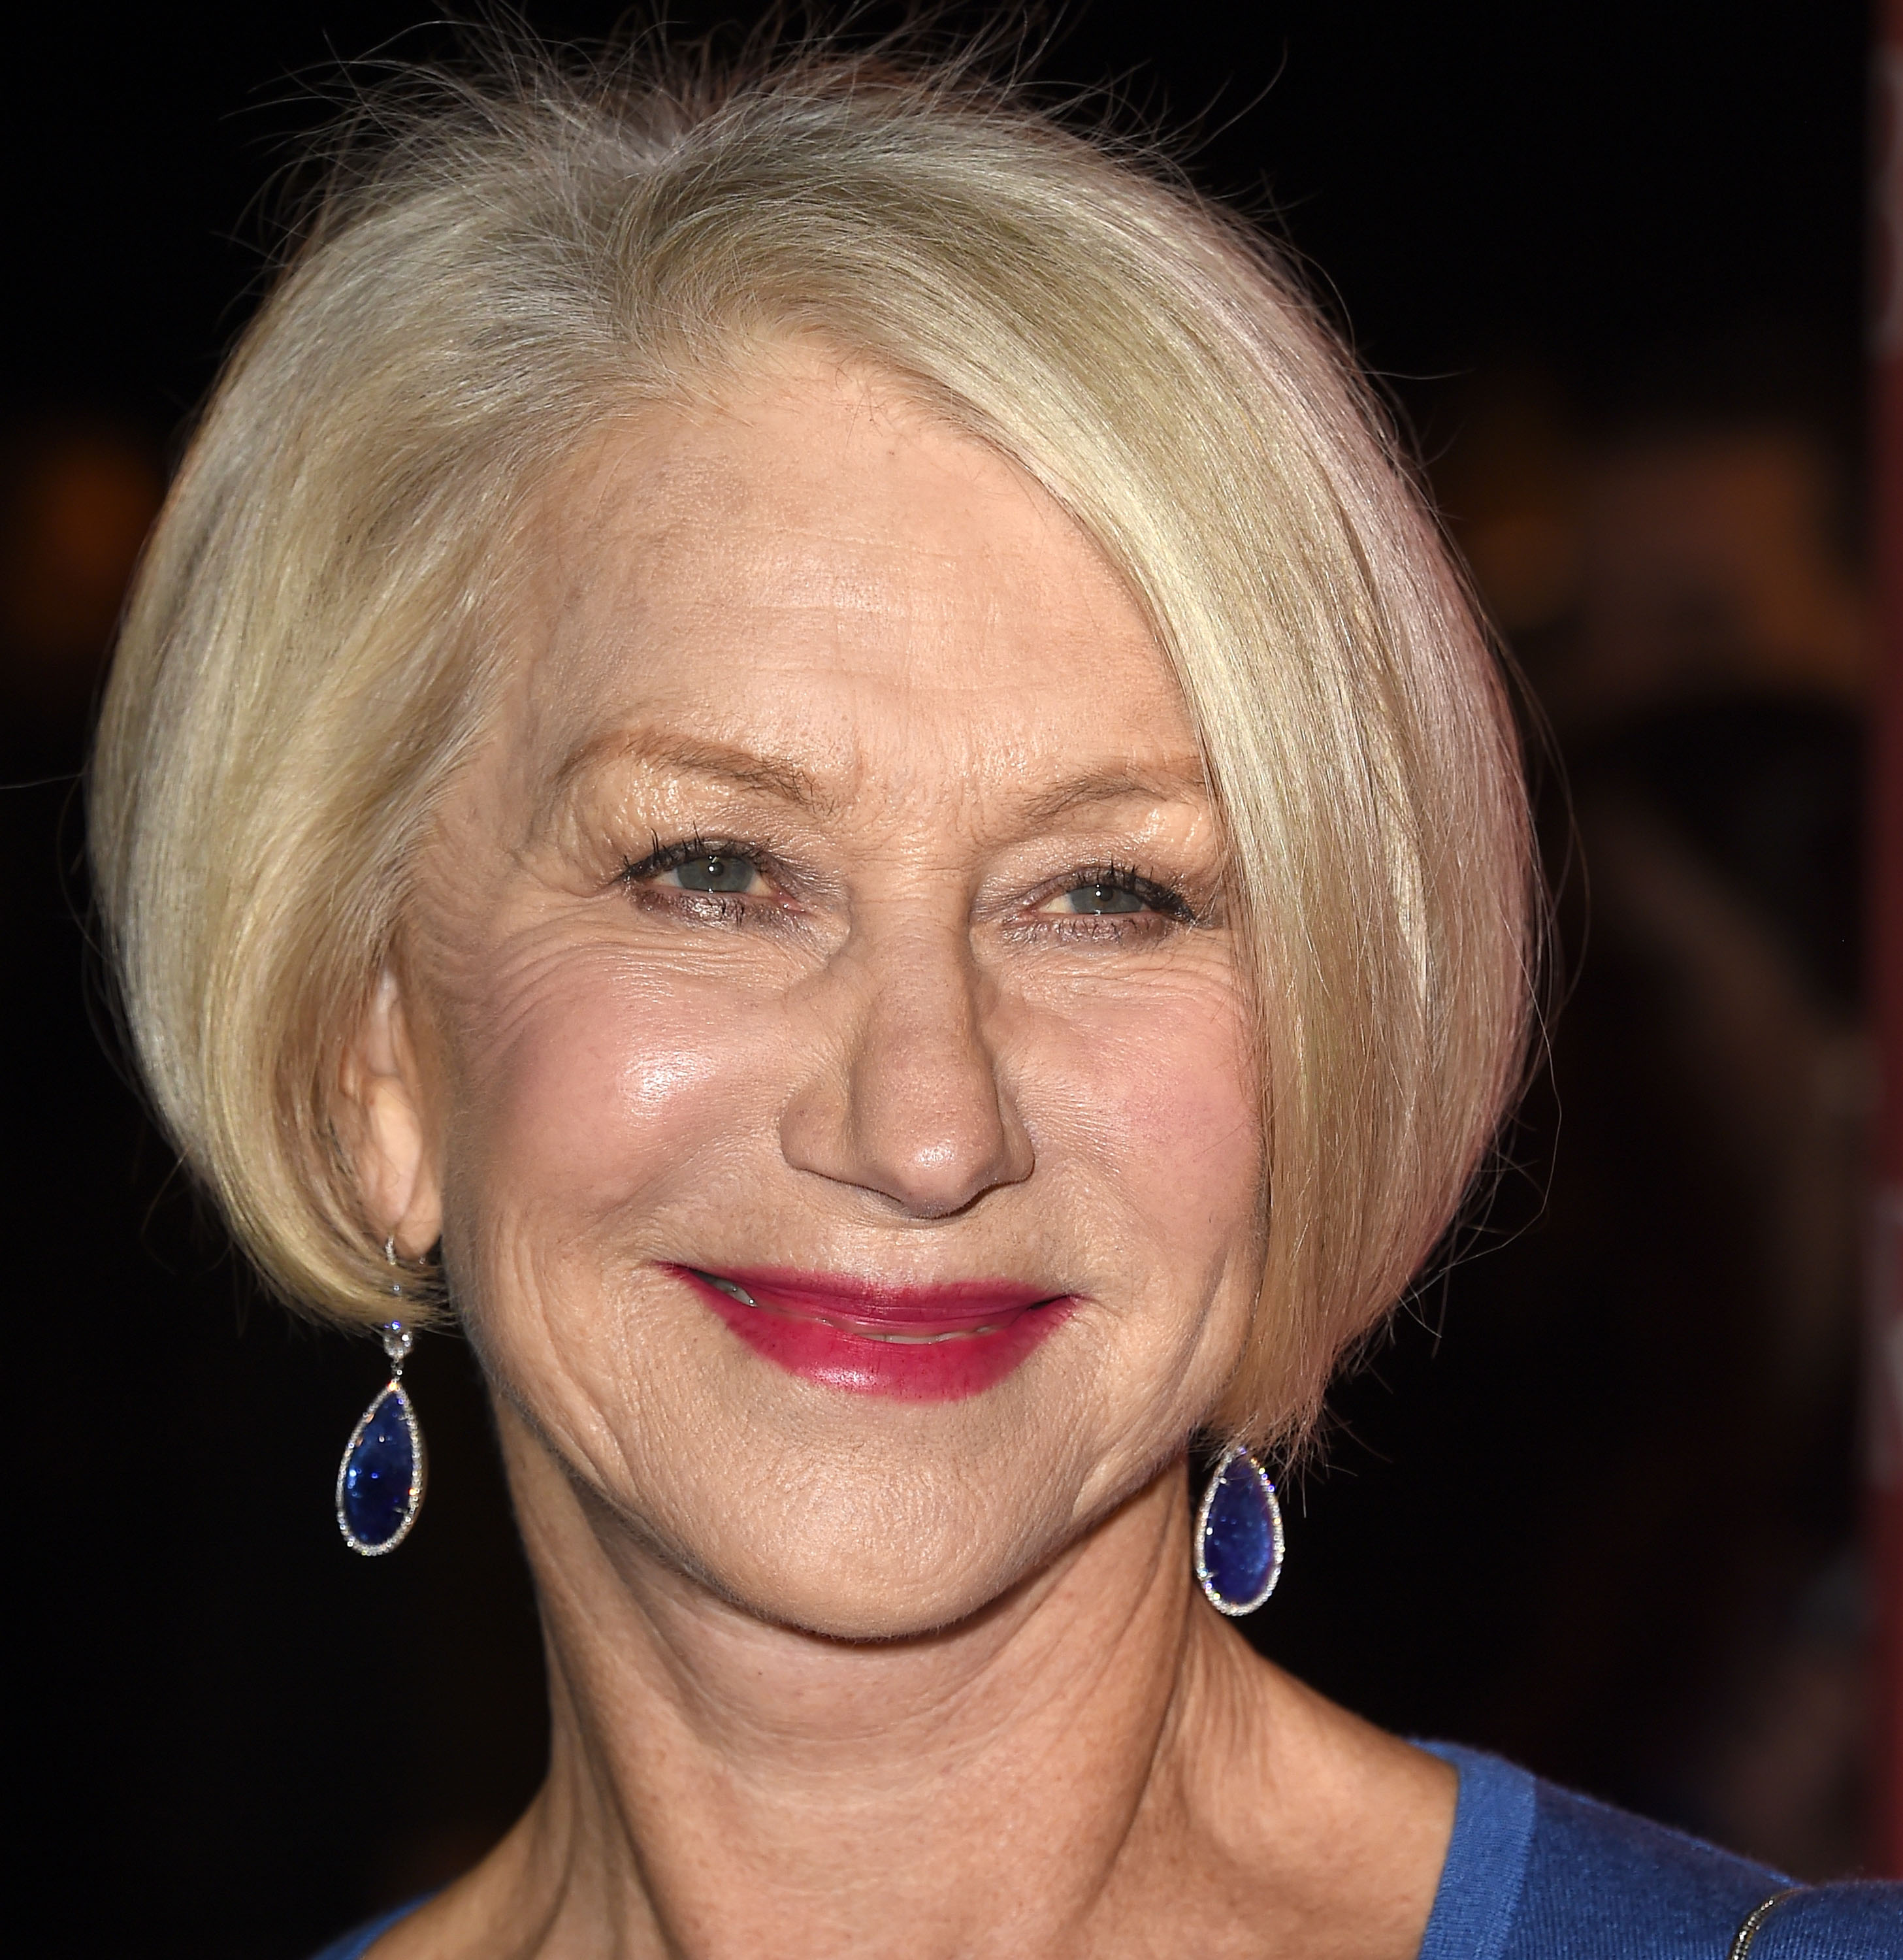 Helen Mirren at the 27th Annual Palm Springs International Film Festival Awards Gala at Palm Springs Convention Center on January 2, 2016 in Palm Springs, California | Source: Getty Images